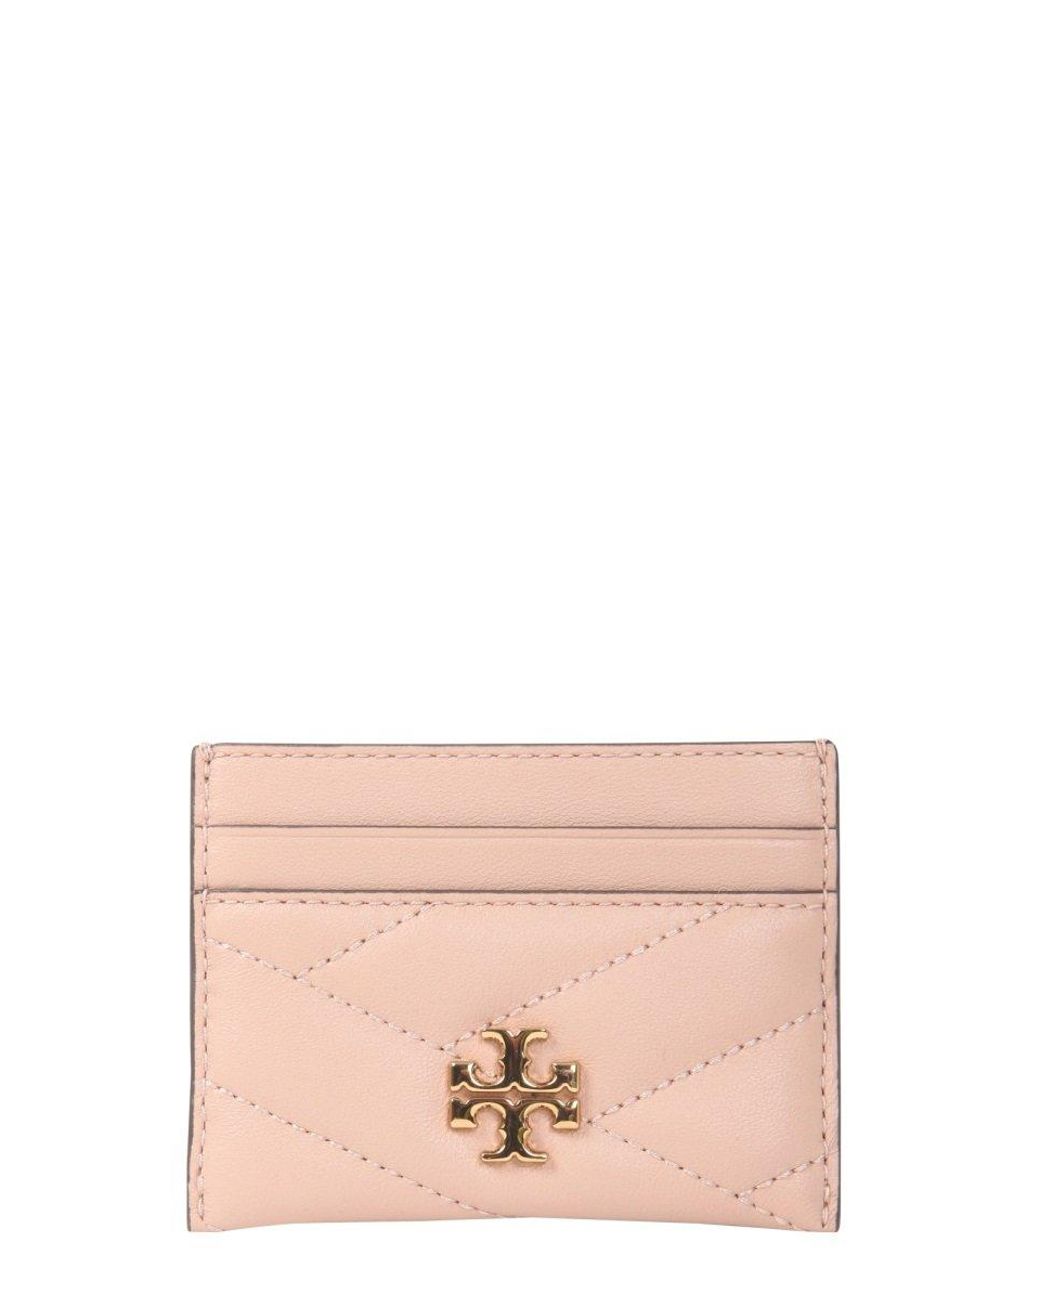 Tory Burch Leather Kira Card Holder in Pink - Save 4% - Lyst